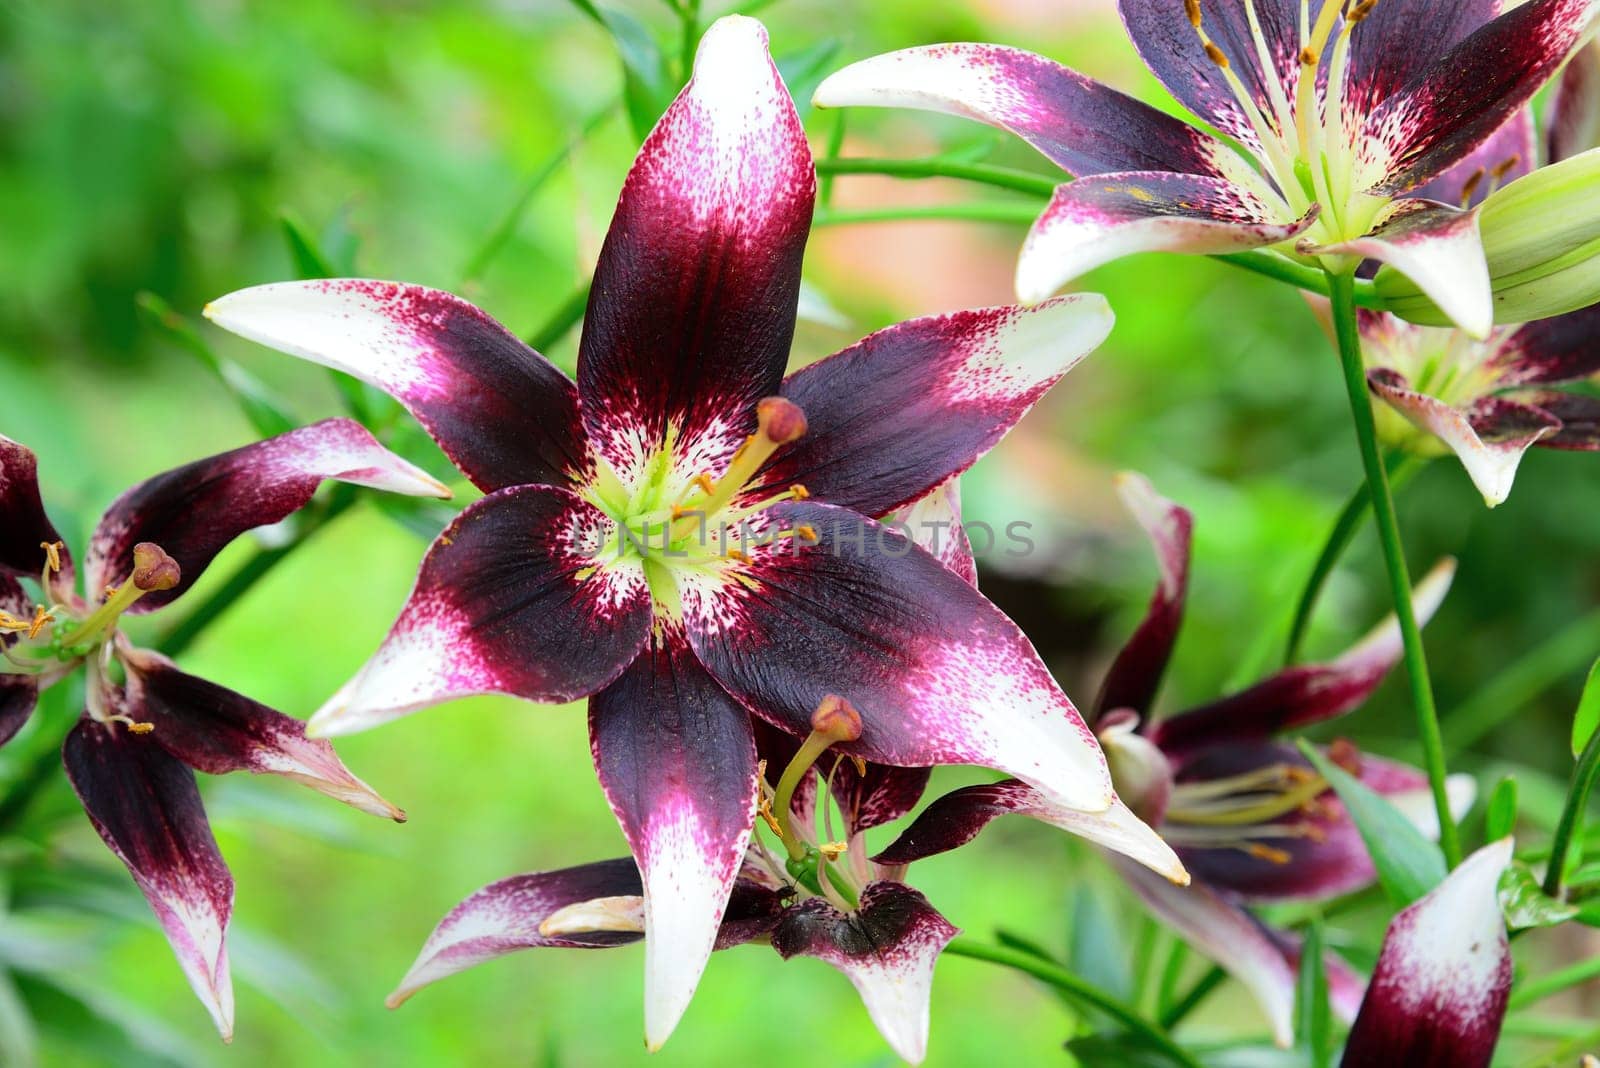 Garden lily with white and purple petals